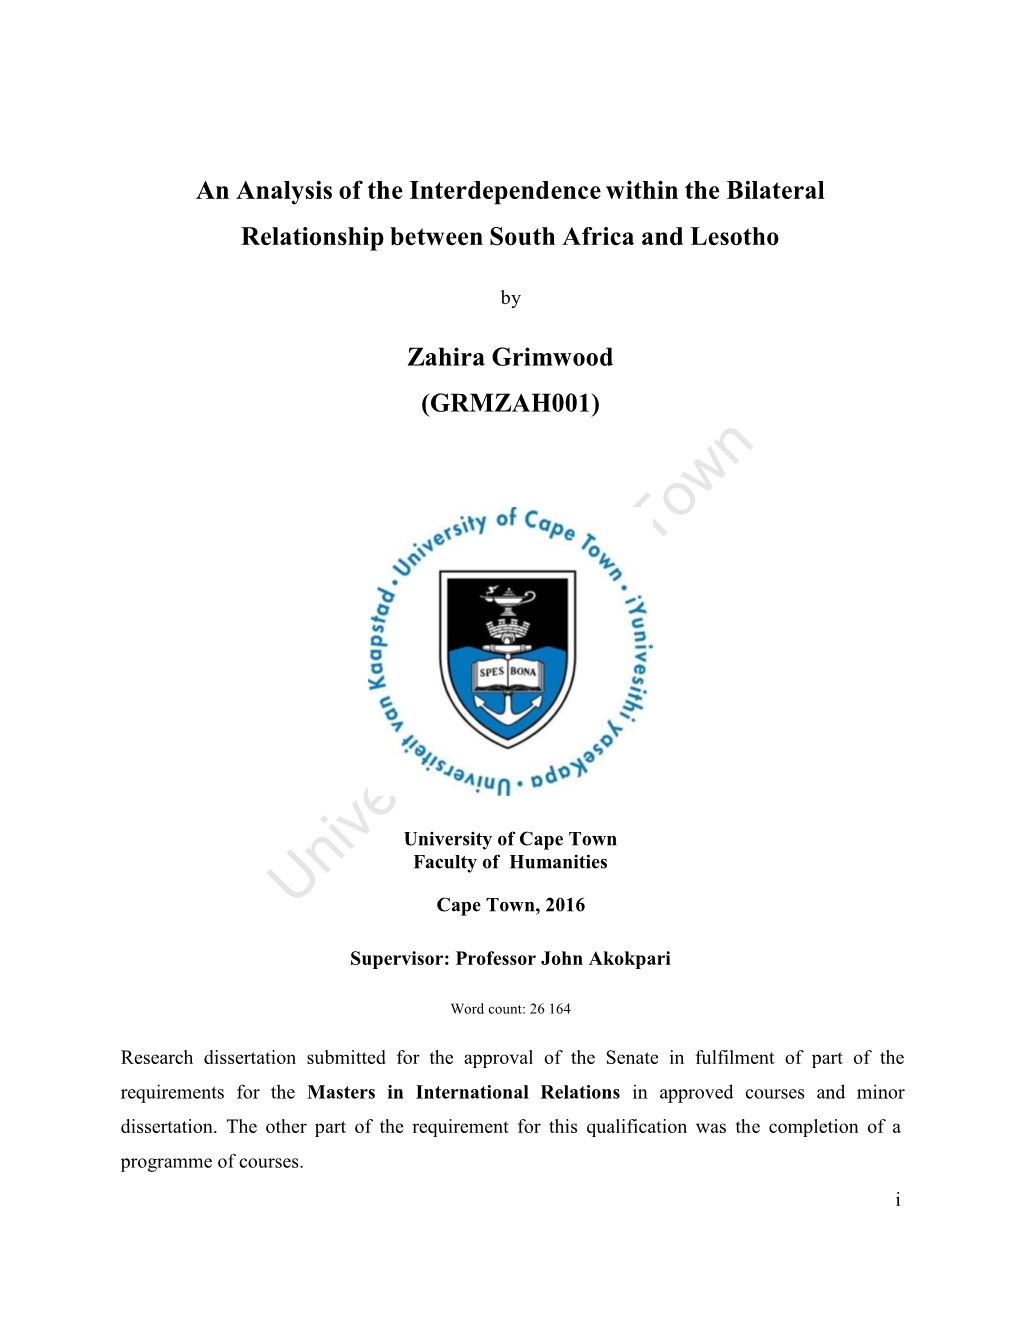 An Analysis of the Interdependence Within the Bilateral Relationship Between South Africa and Lesotho